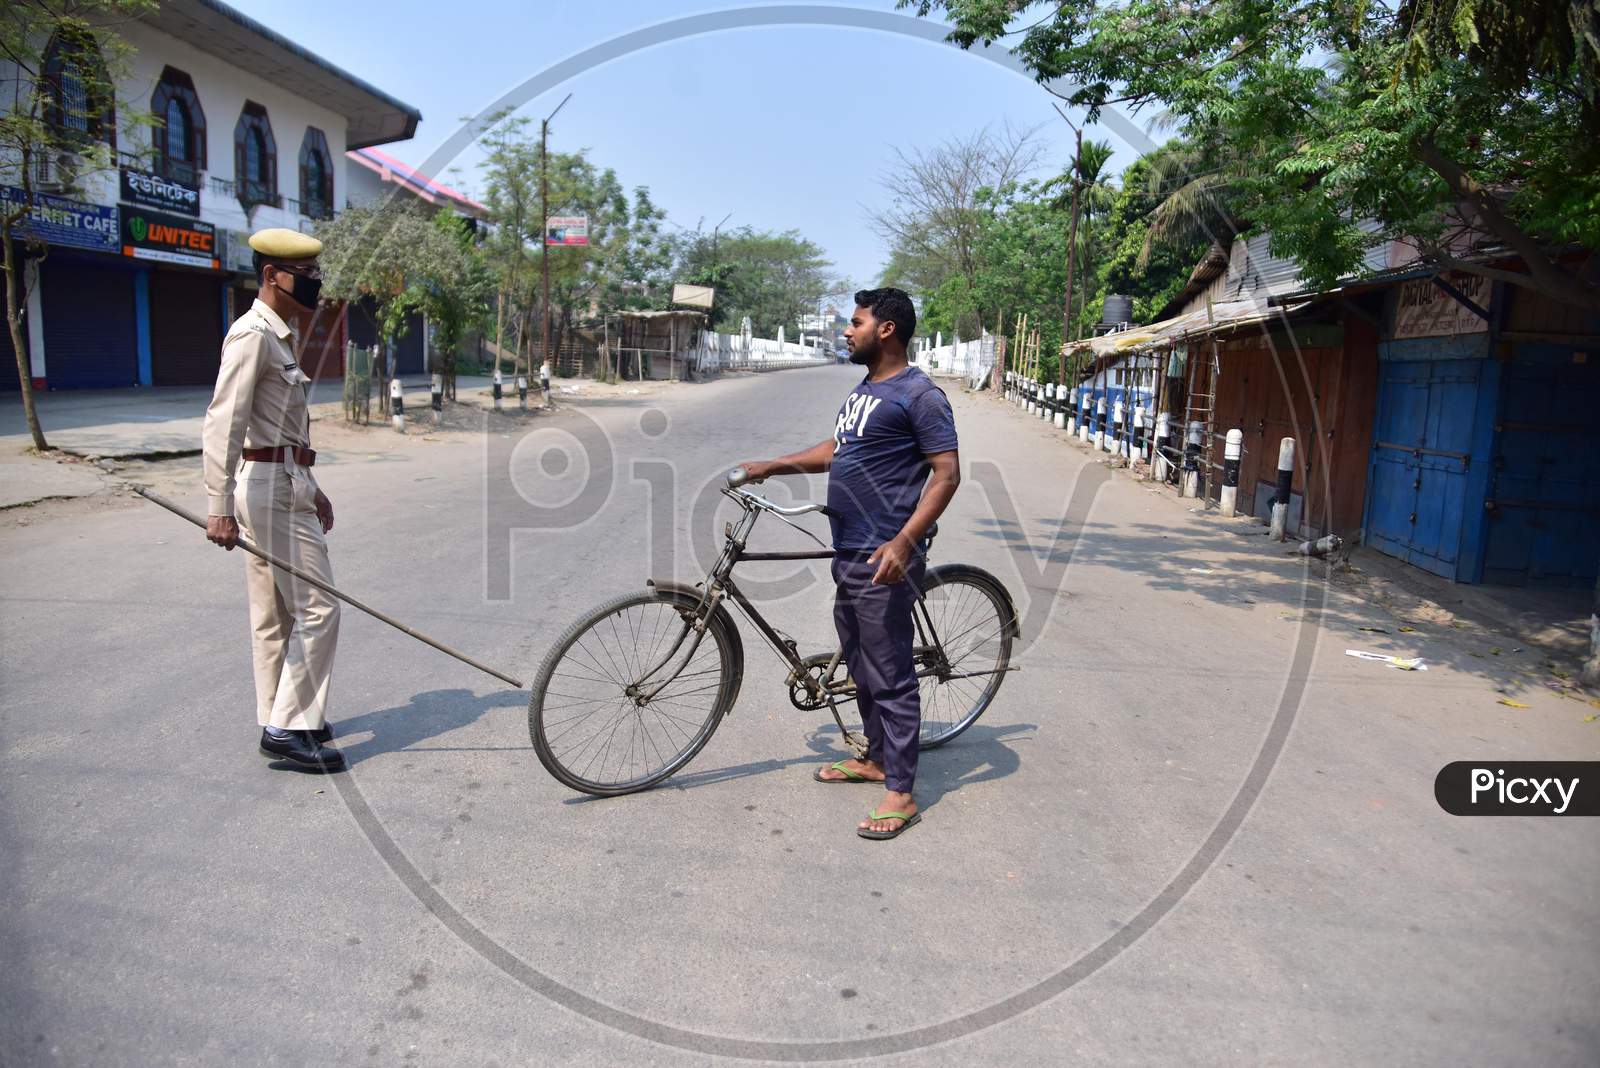 Police Personnel Question Commuters Who Defied Curfew During A 21-Day Nationwide Lockdown, In The Wake Of Coronavirus Pandemic, In Nagaon District Of Assam,India